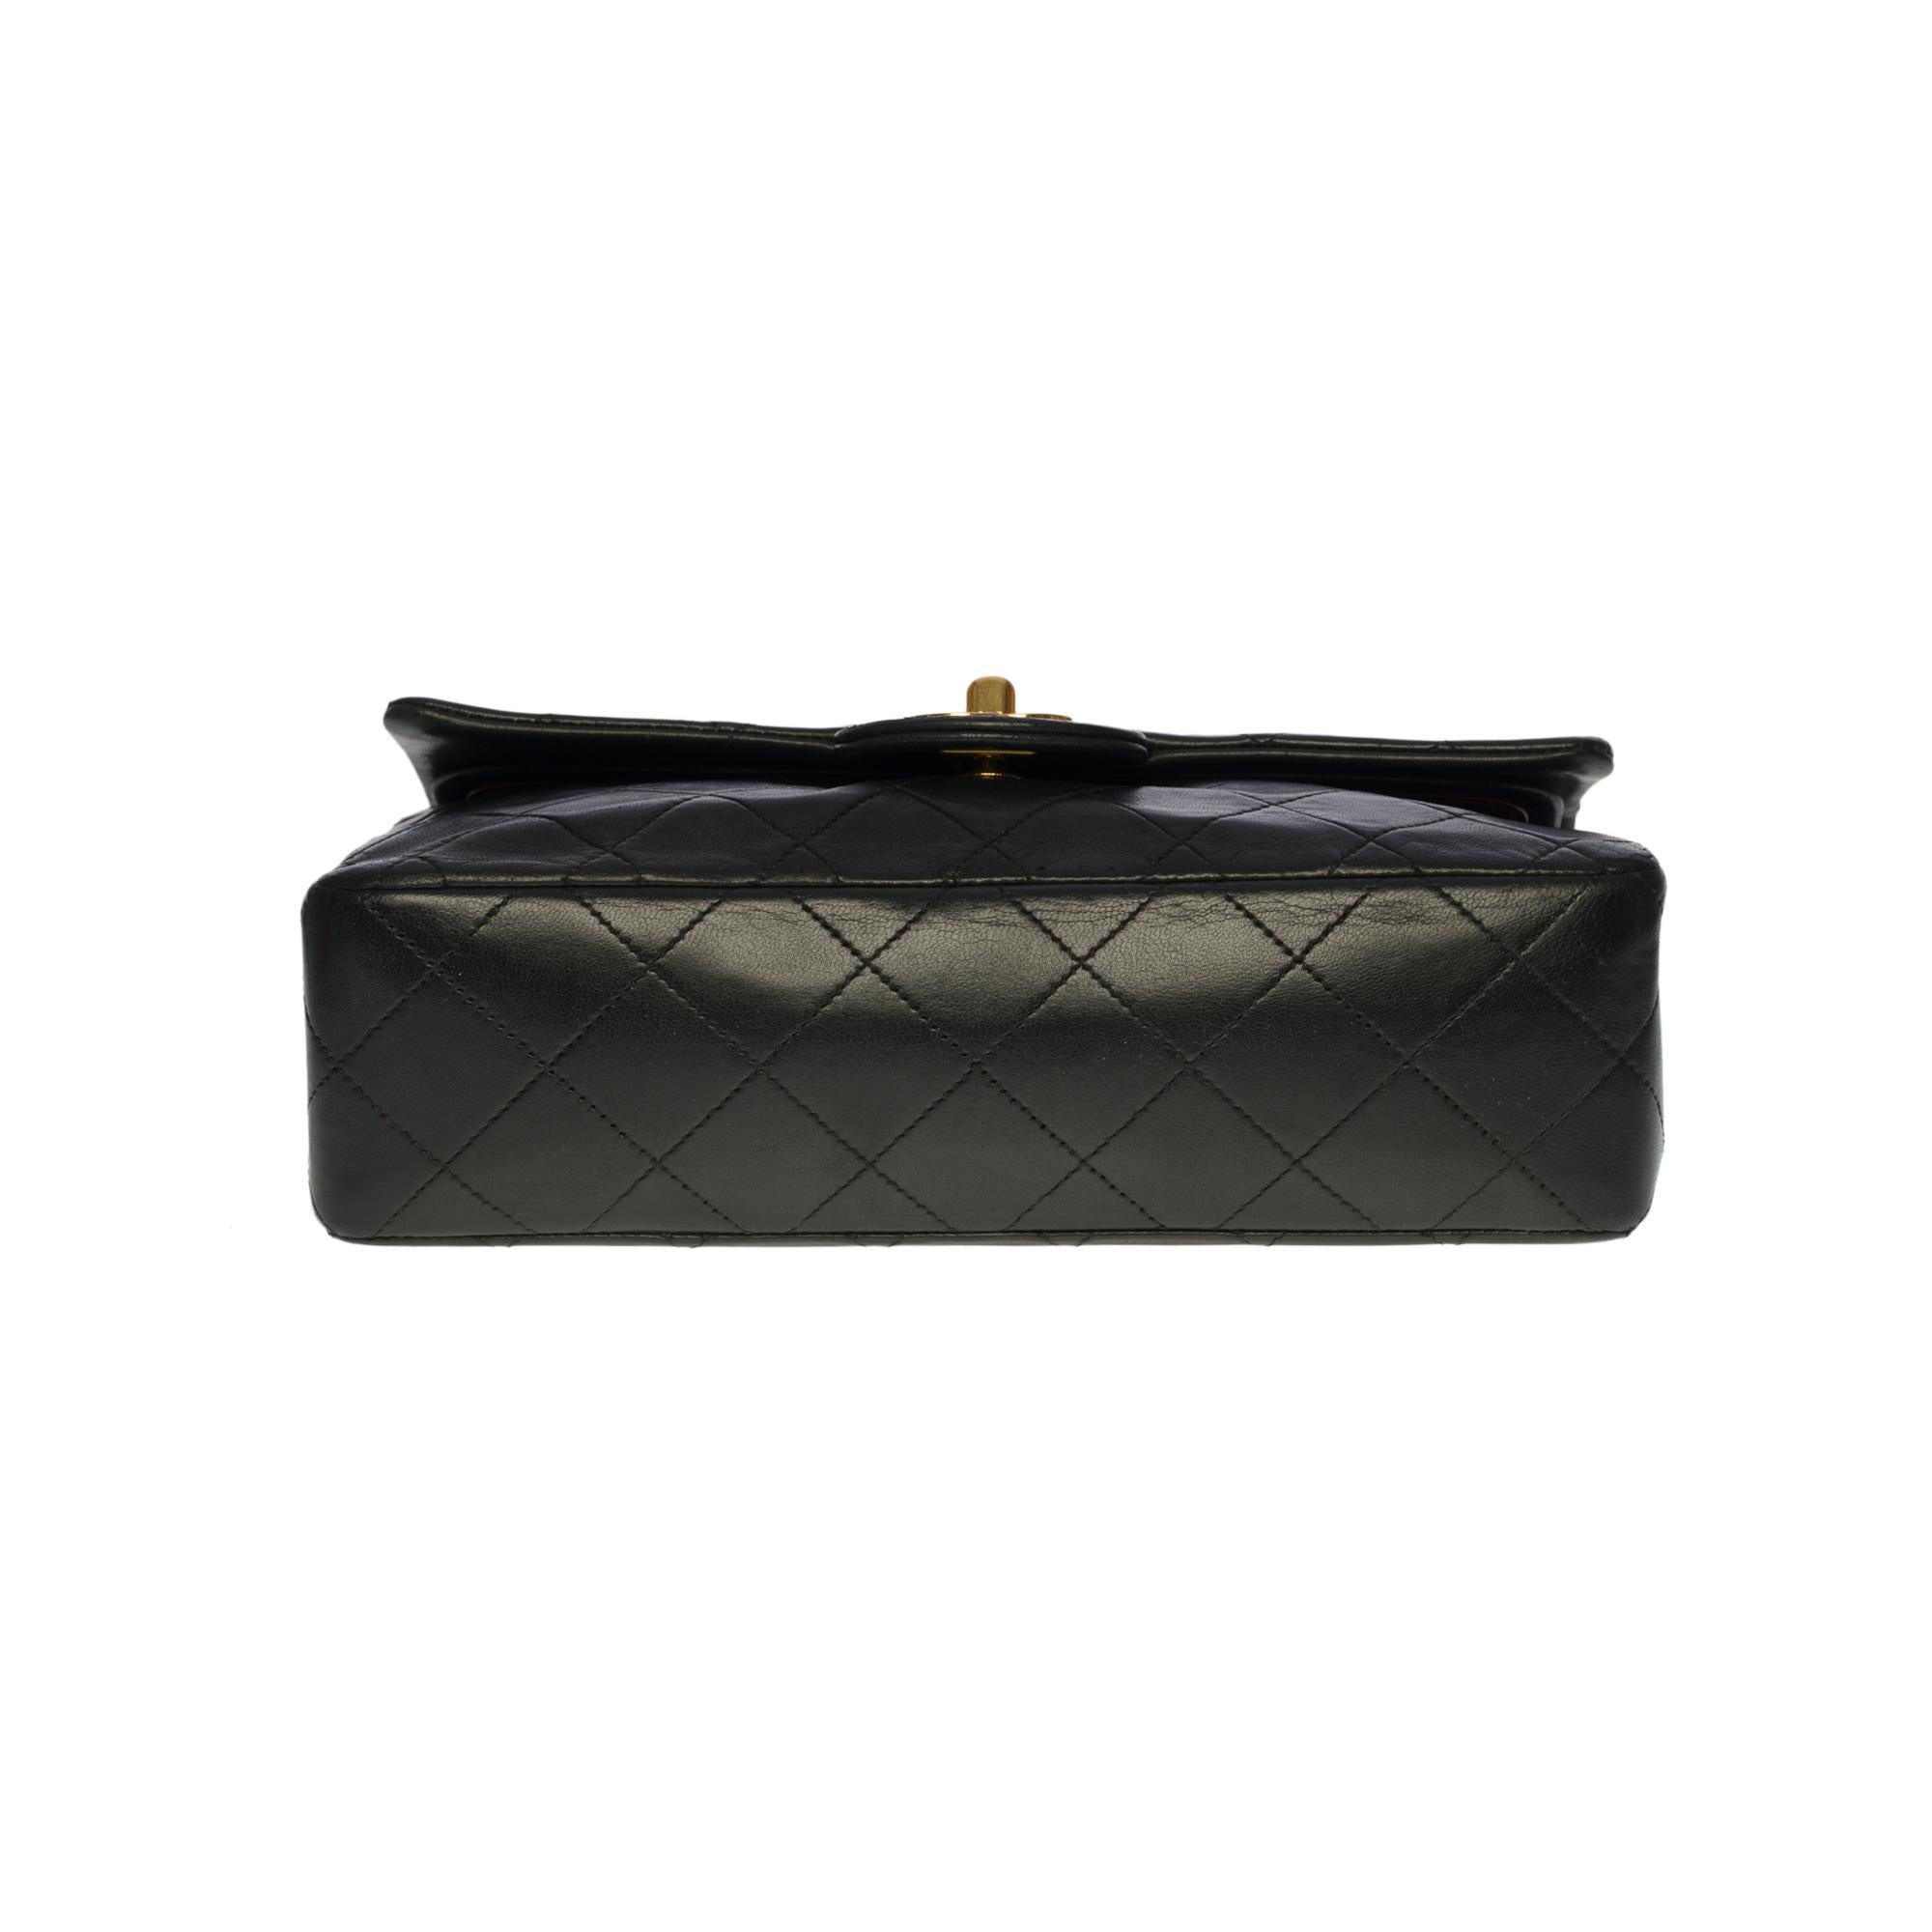 Chanel Timeless 23 cm double flap shoulder bag in black quilted lambskin, GHW 2